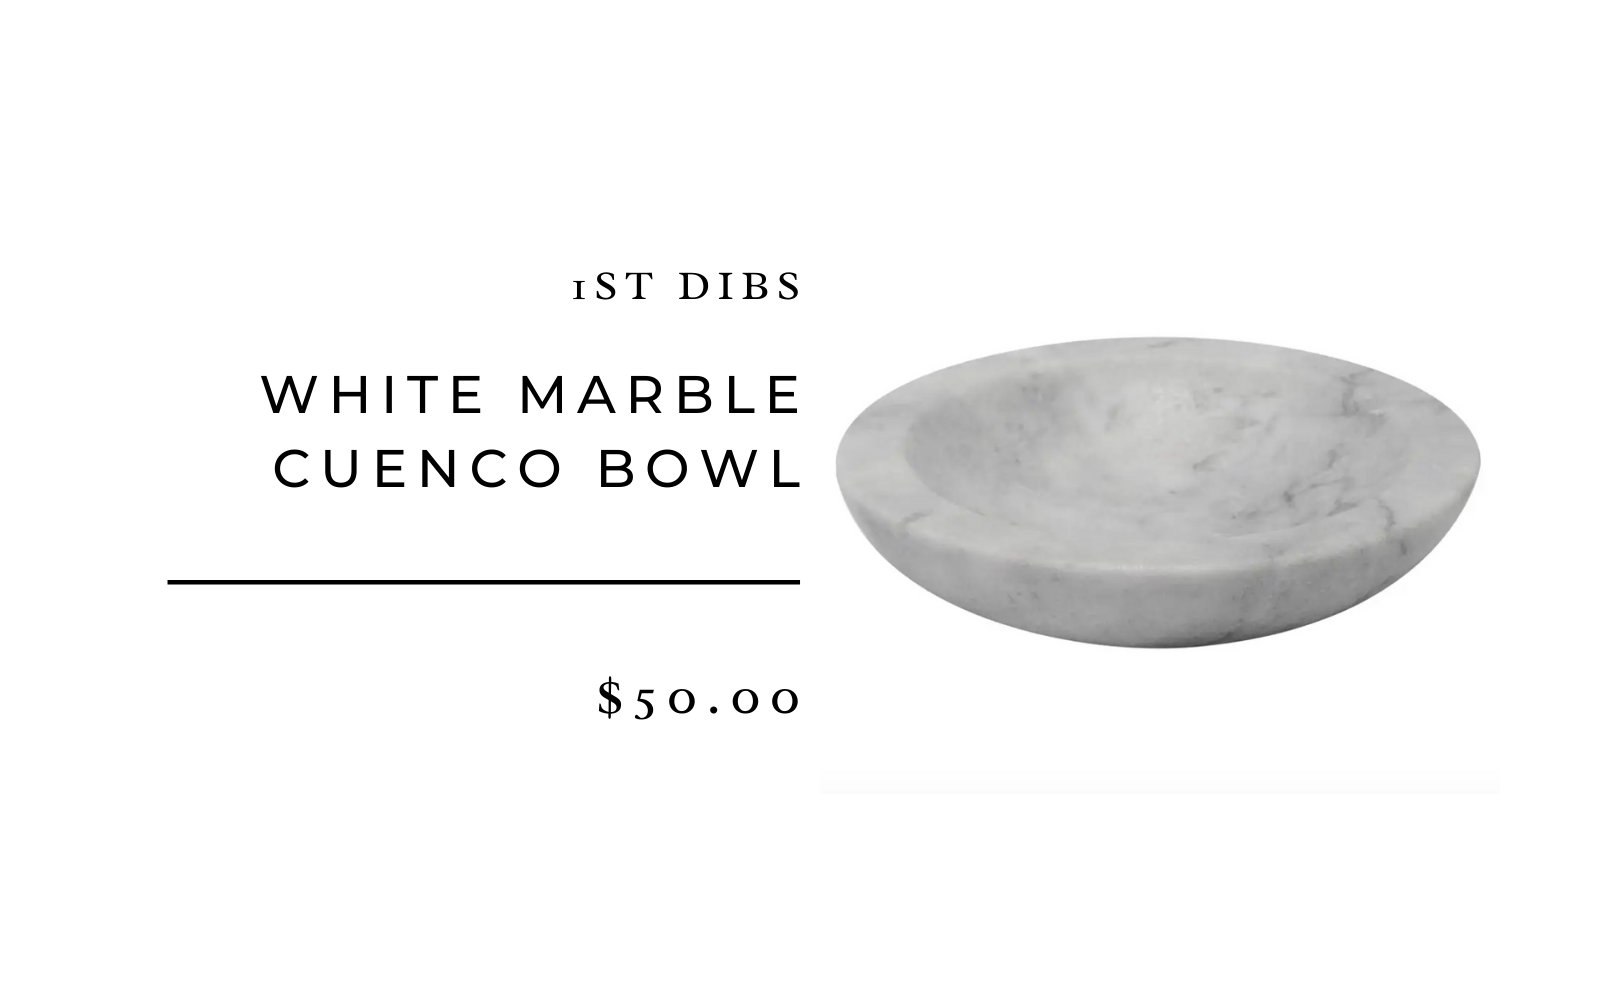 White Marble Cuenco Bowl